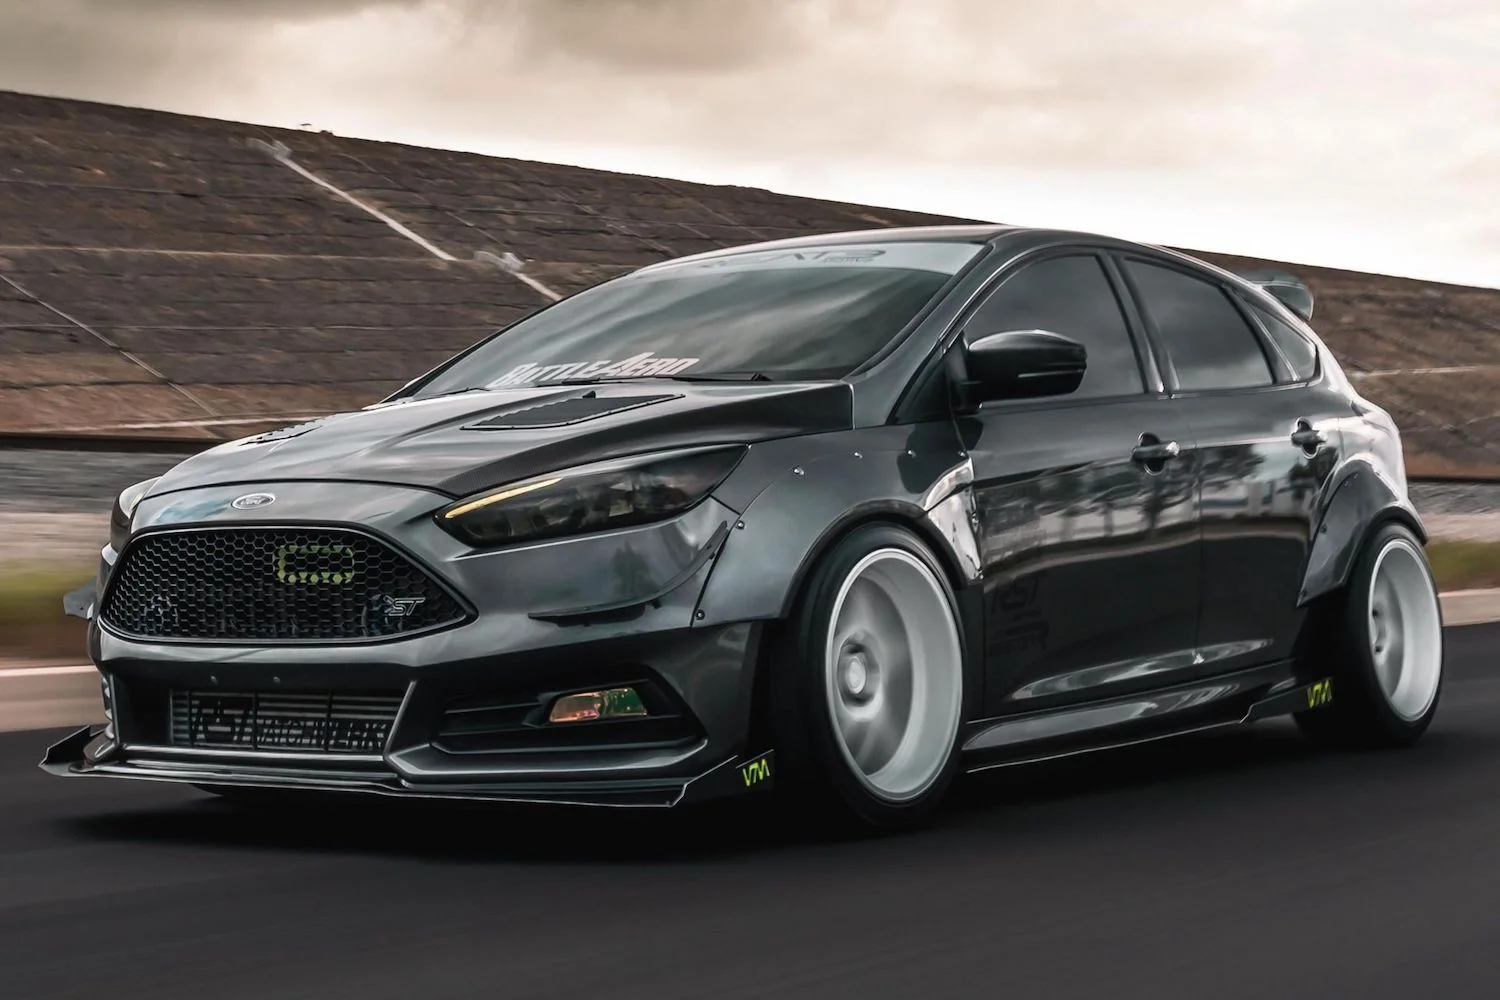 Heavily Modified 2016 Ford Focus ST Is Up For Grabs